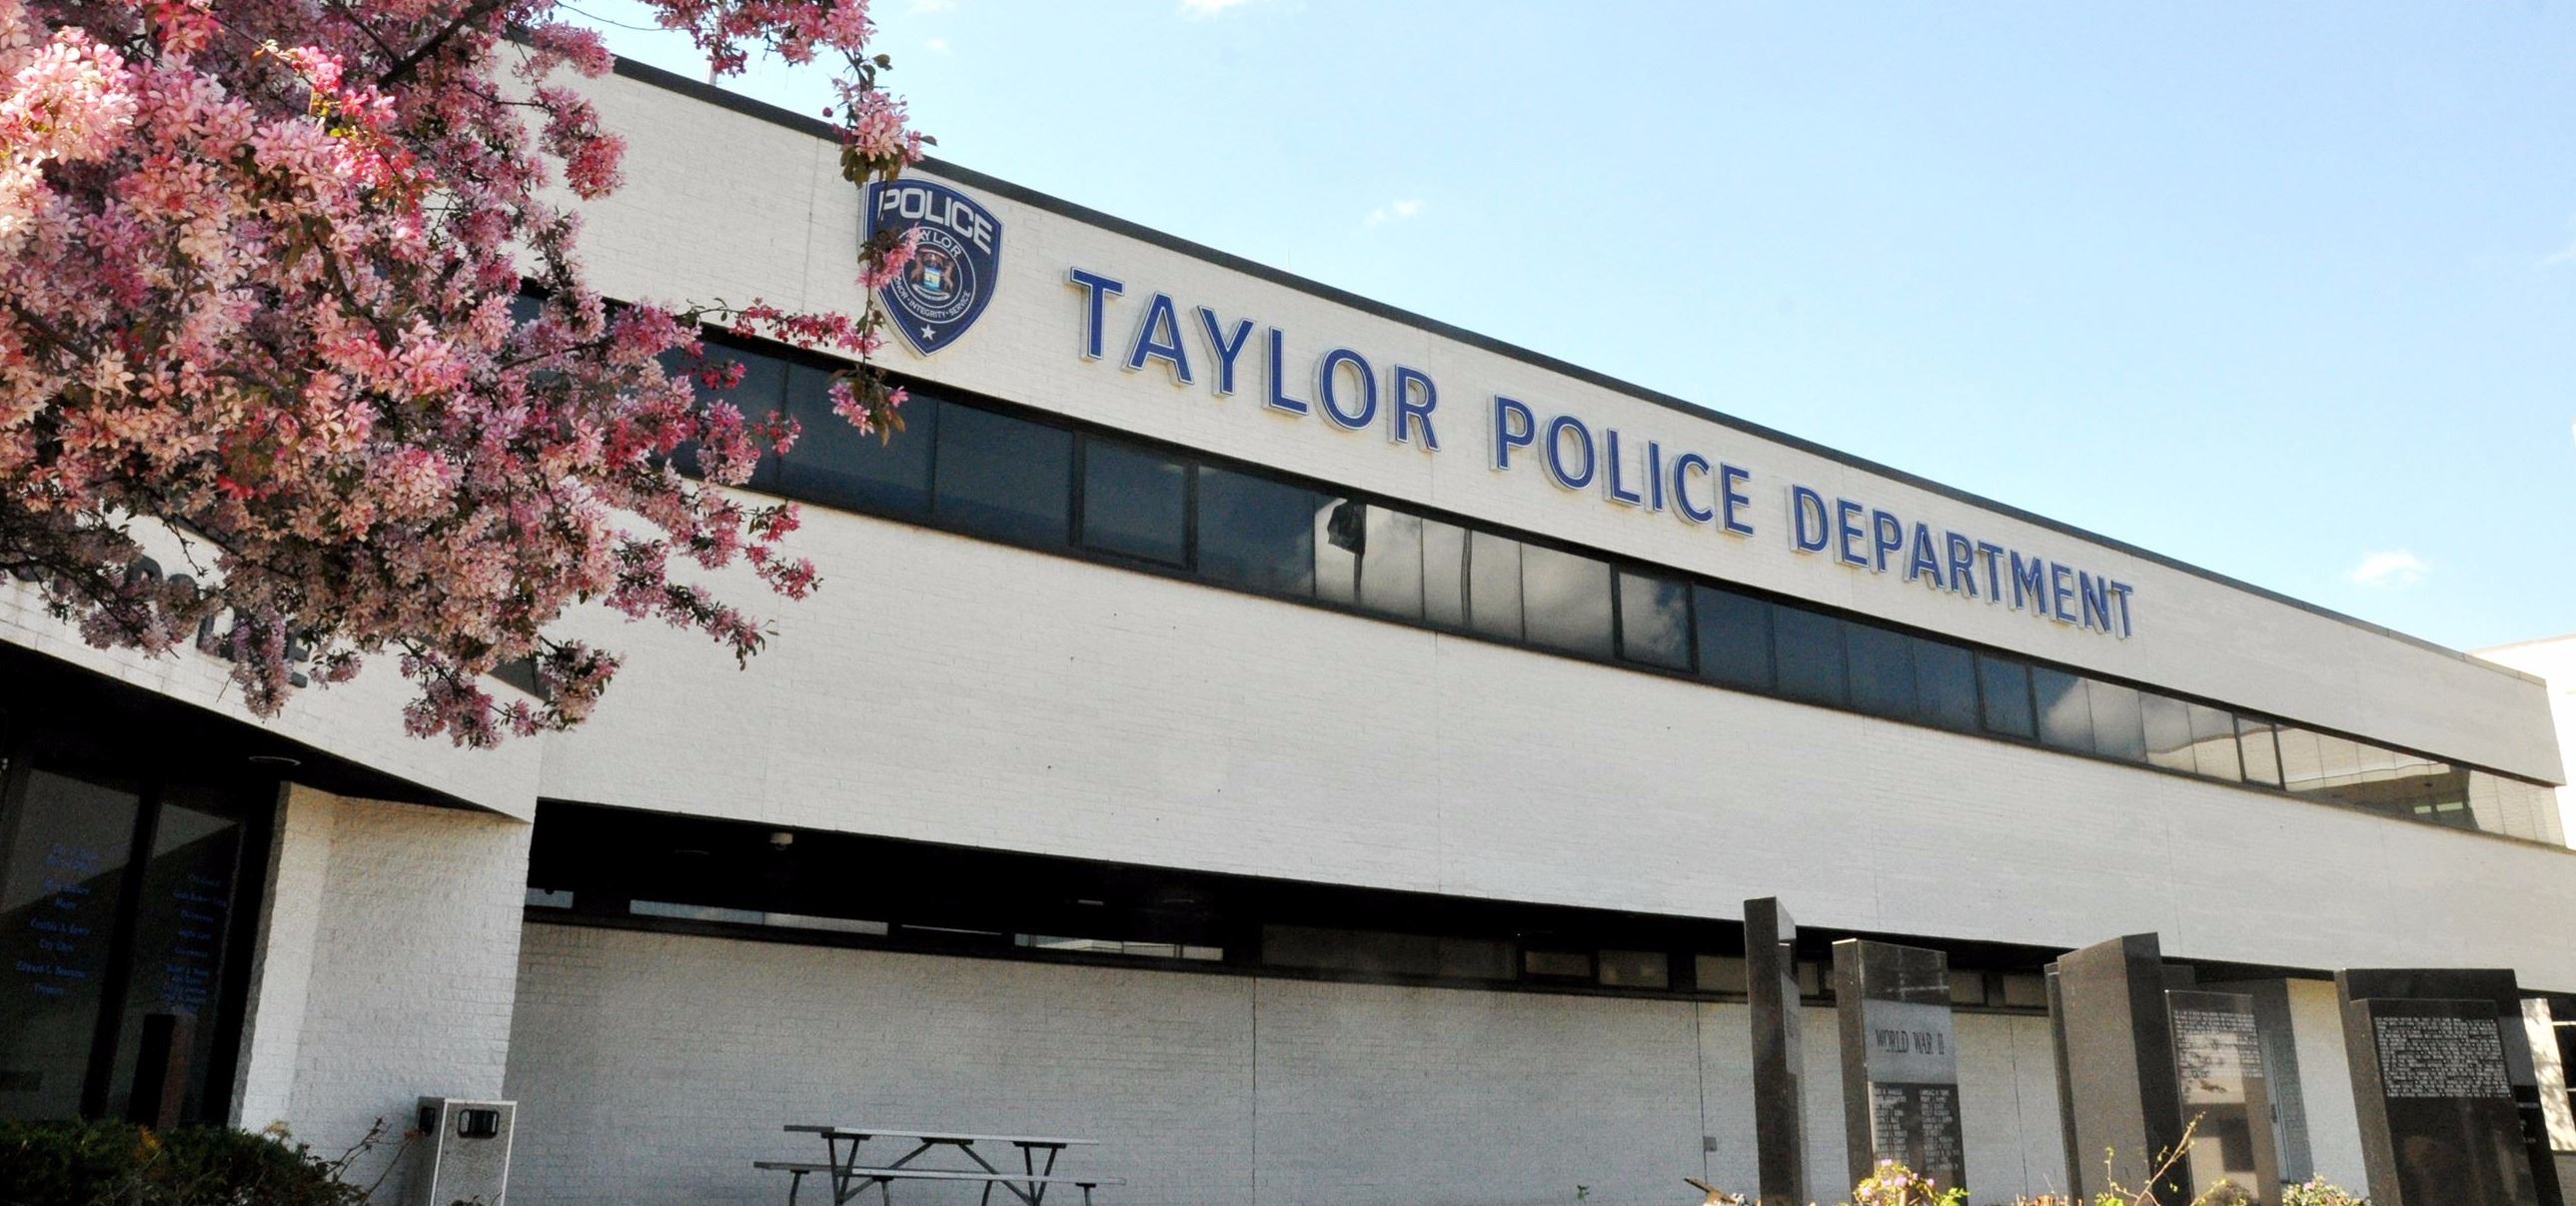 Image of City of Taylor Police Department